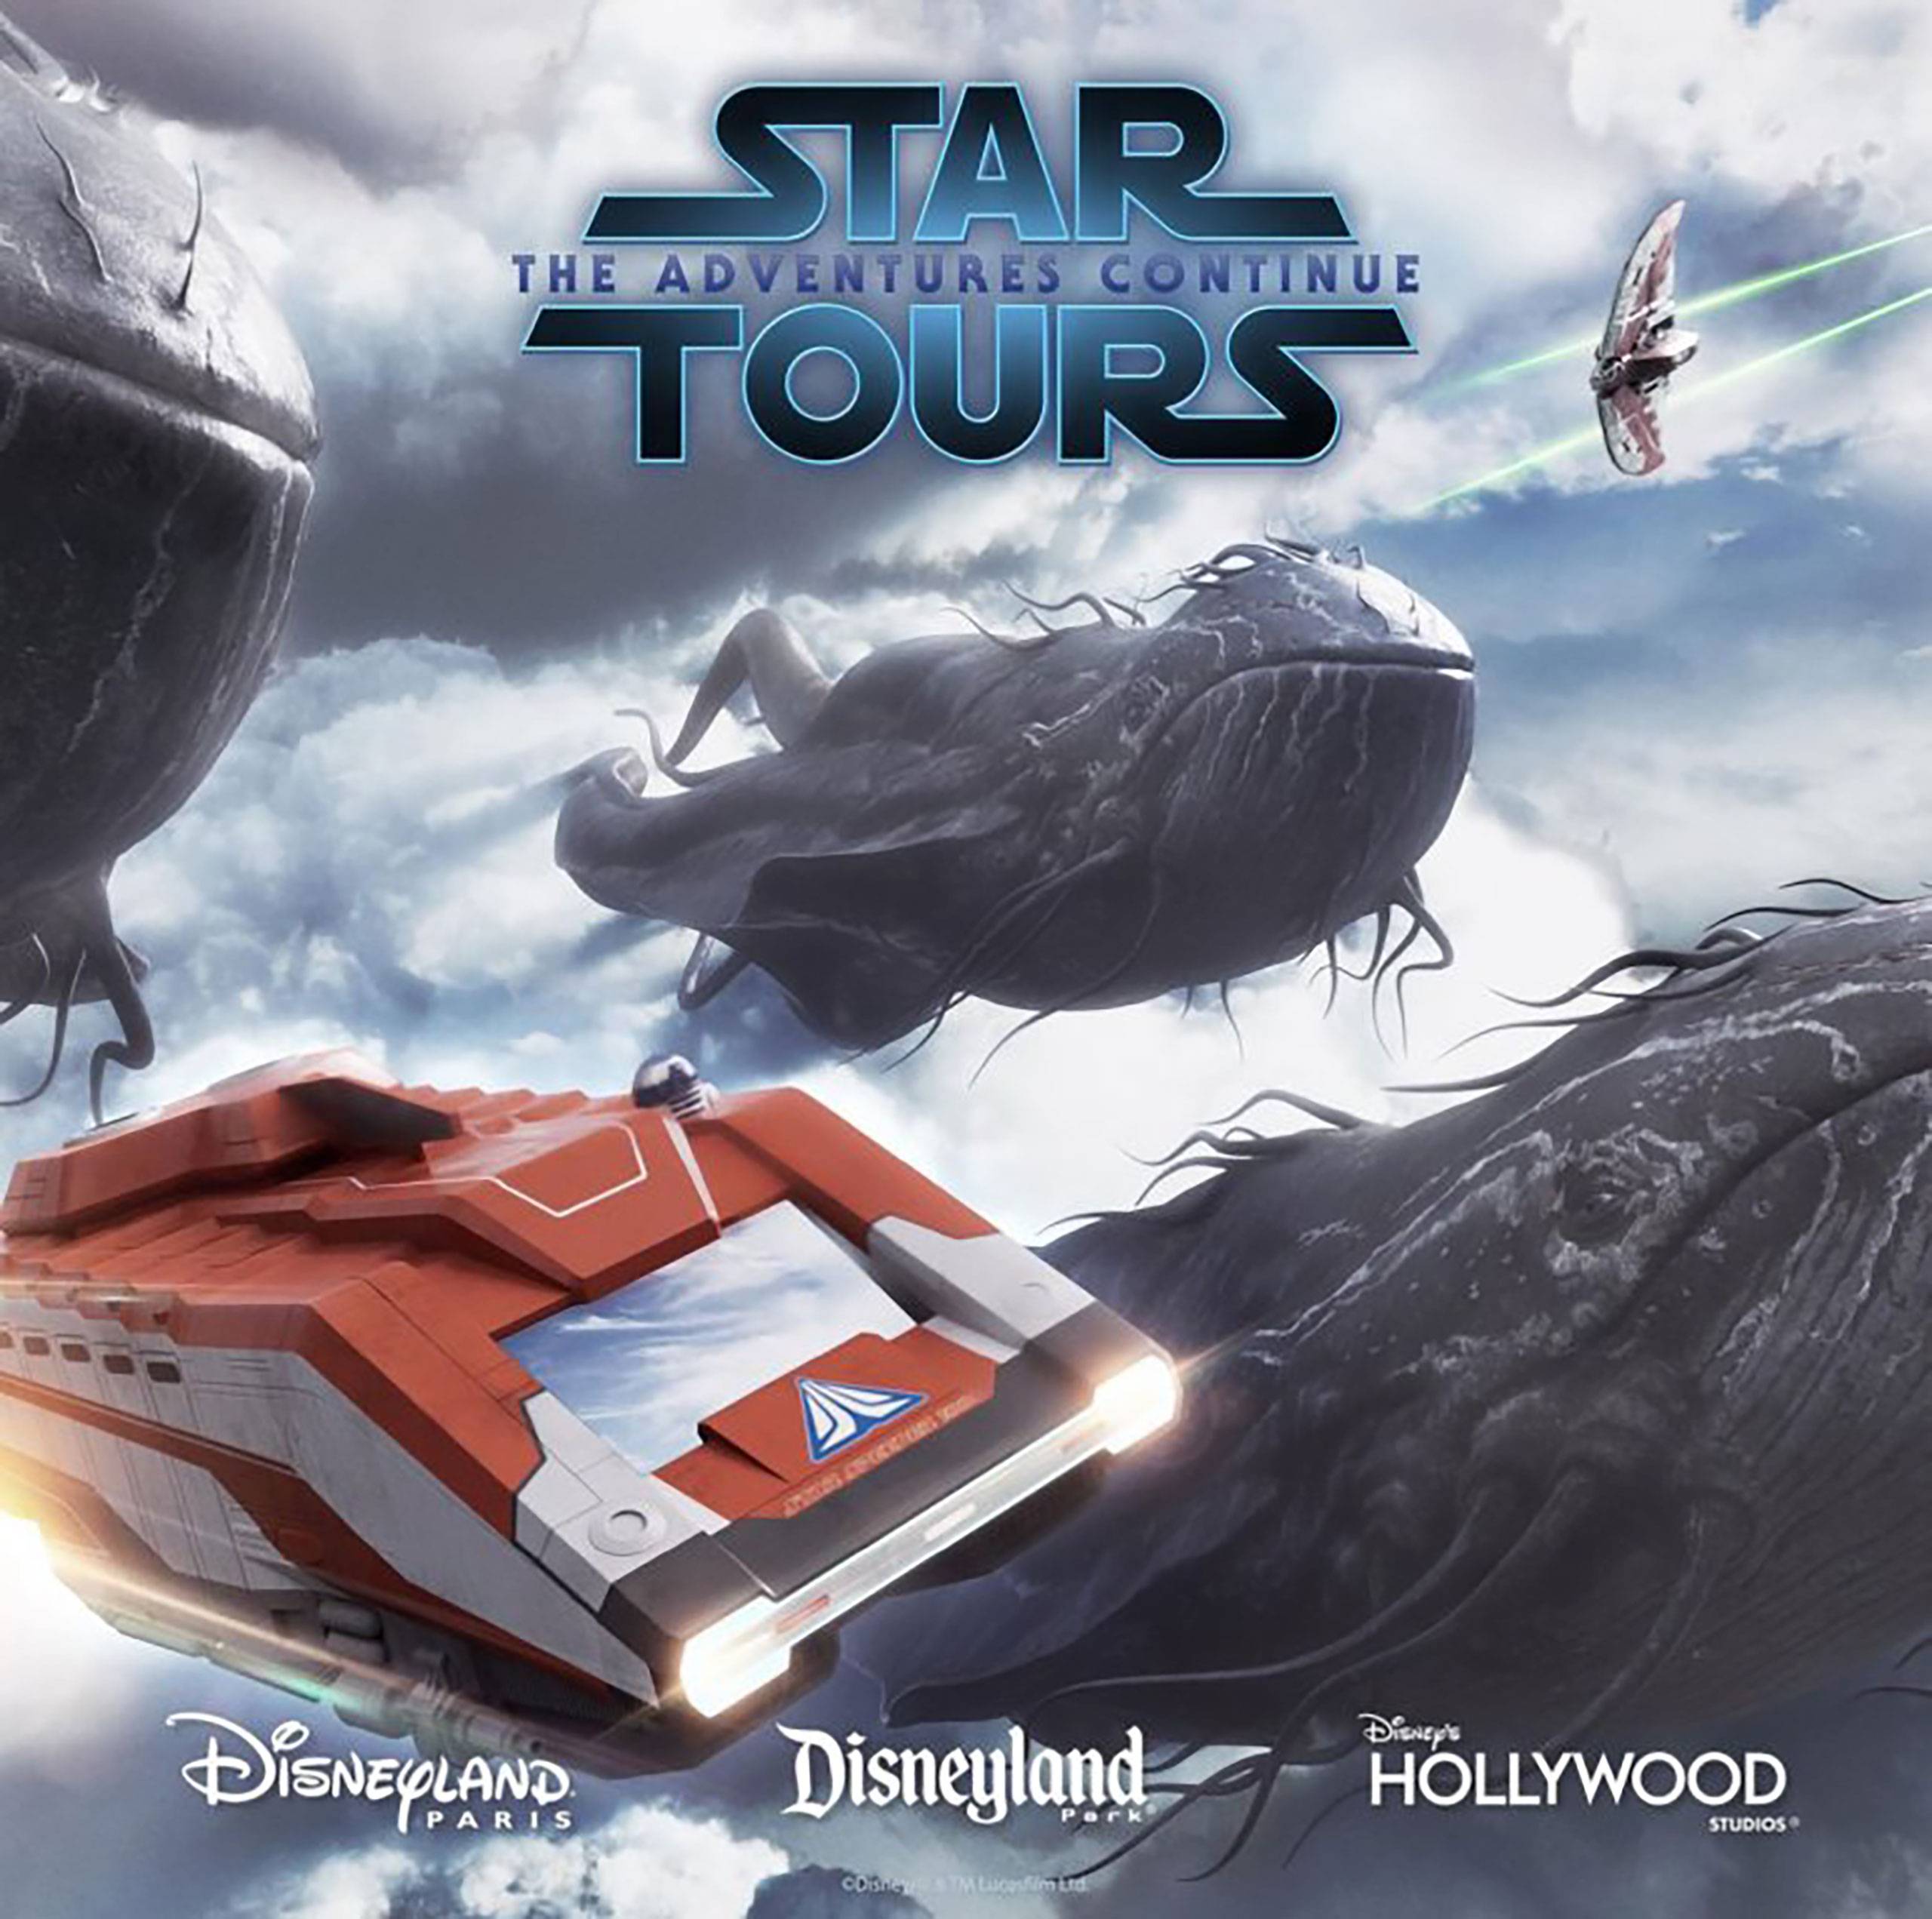 Now boarding at Disney's Hollywood Studios - new destinations at Star Tours featuring Ahsoka, Andor, and The Mandalorian